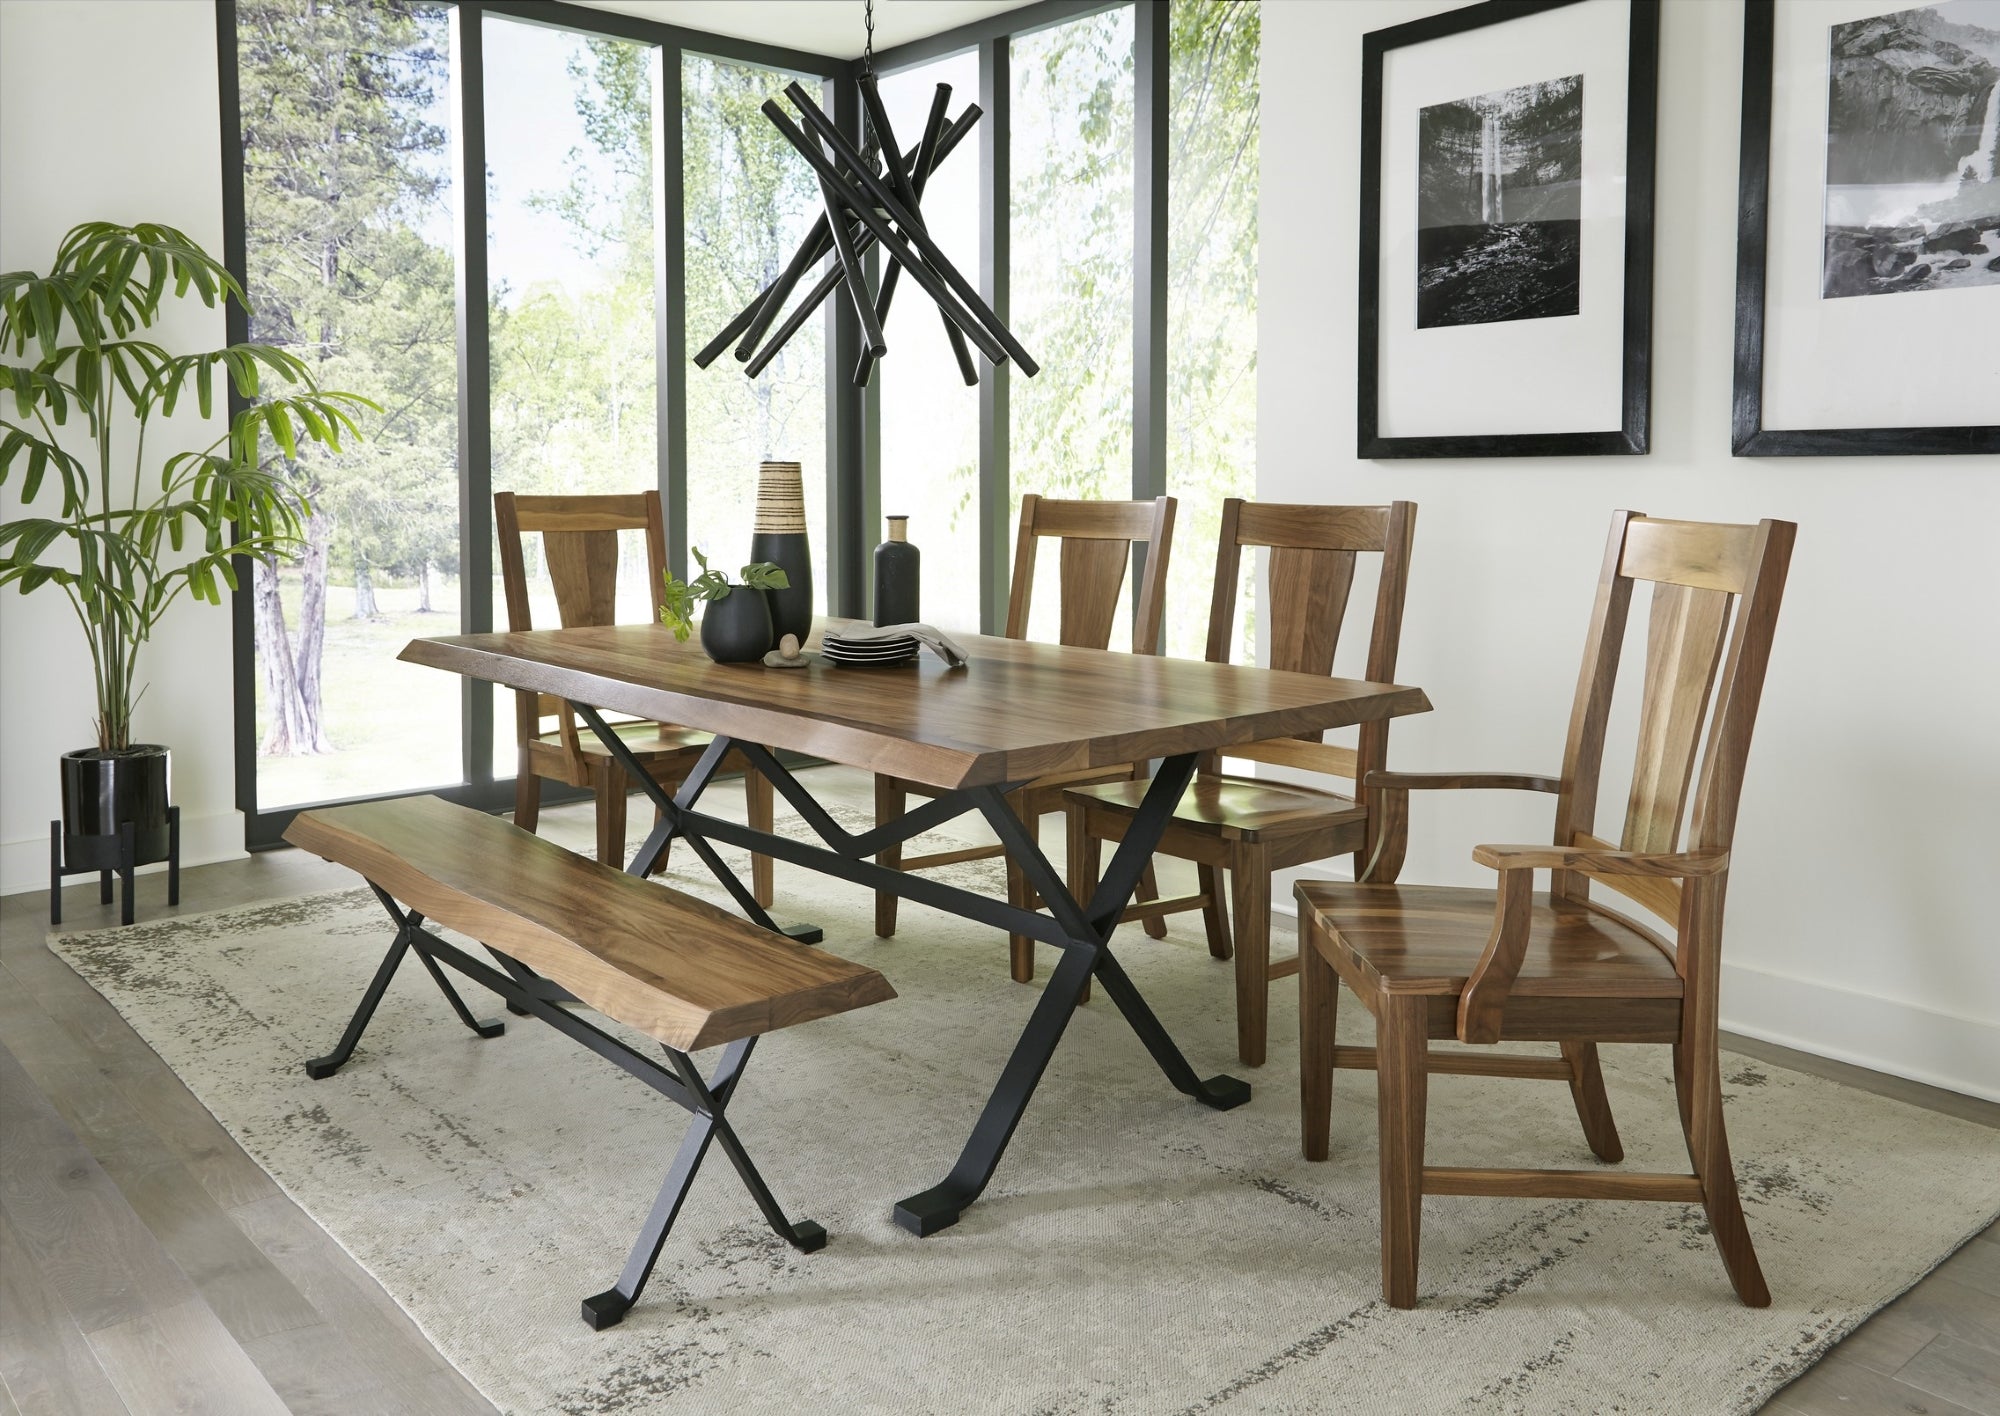 Live-edge wood dining table with a metal base, matching bed, and four coordinating wood dining chairs.